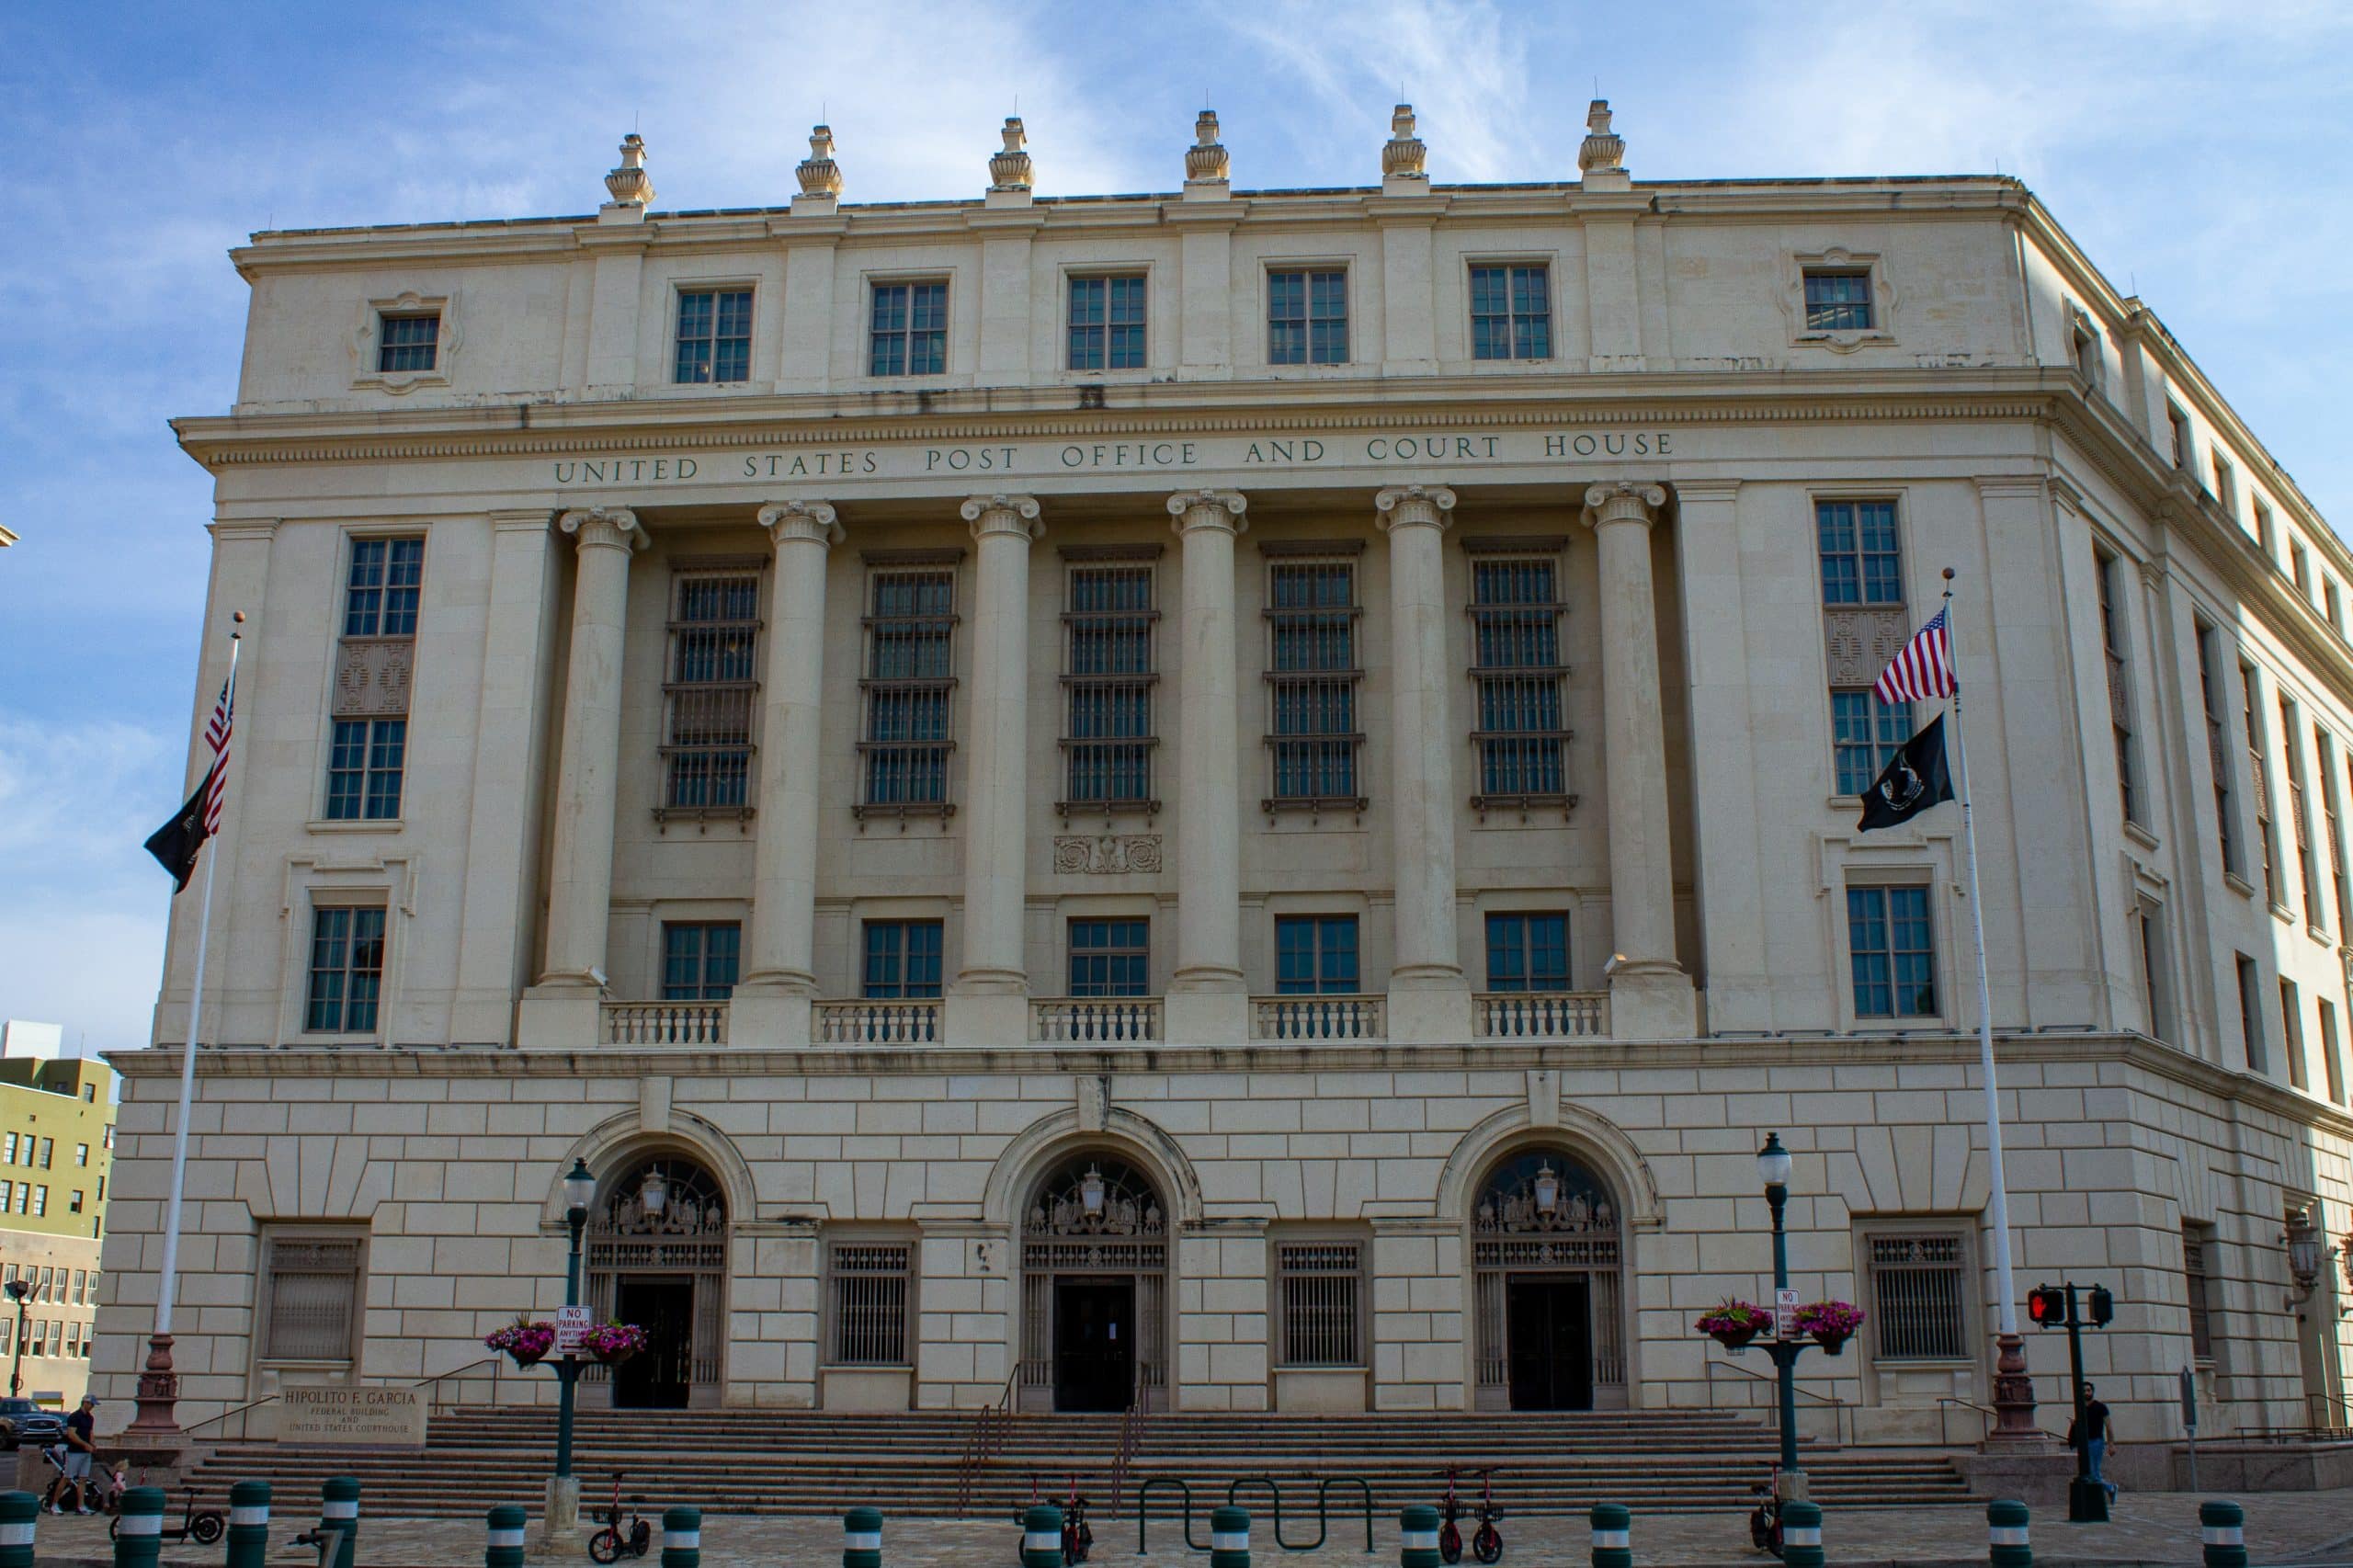 Texas court house to file divorce papers